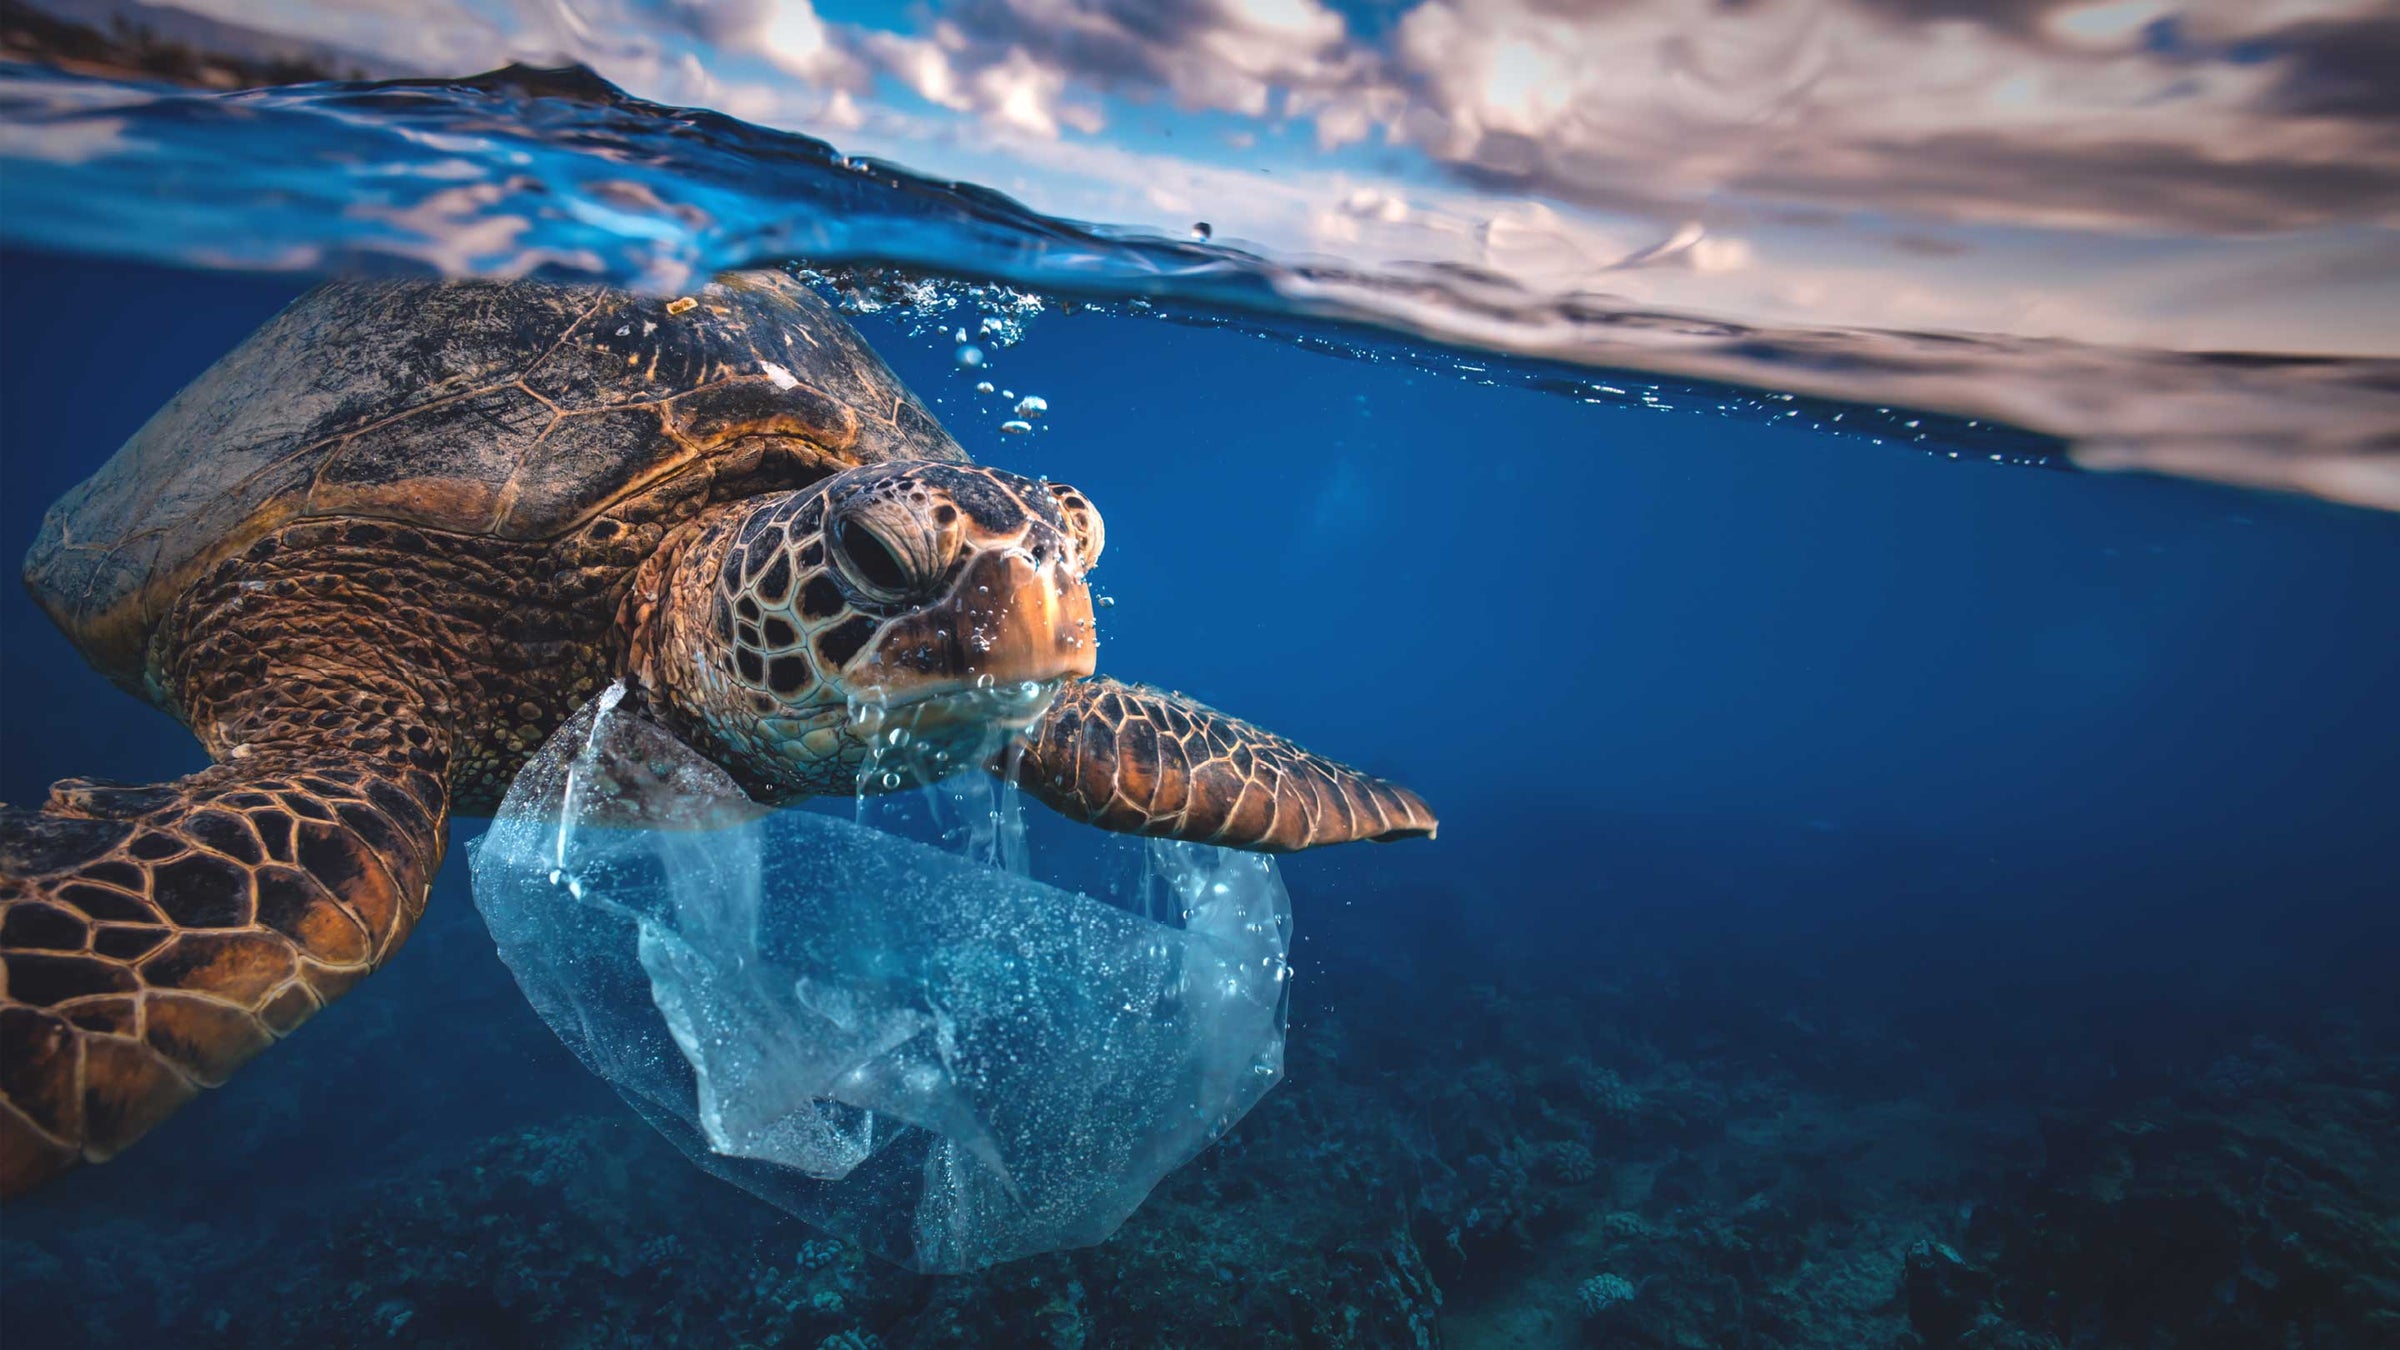 A picture of a turtle swimming in litter with a plastic bag wrapped around it.